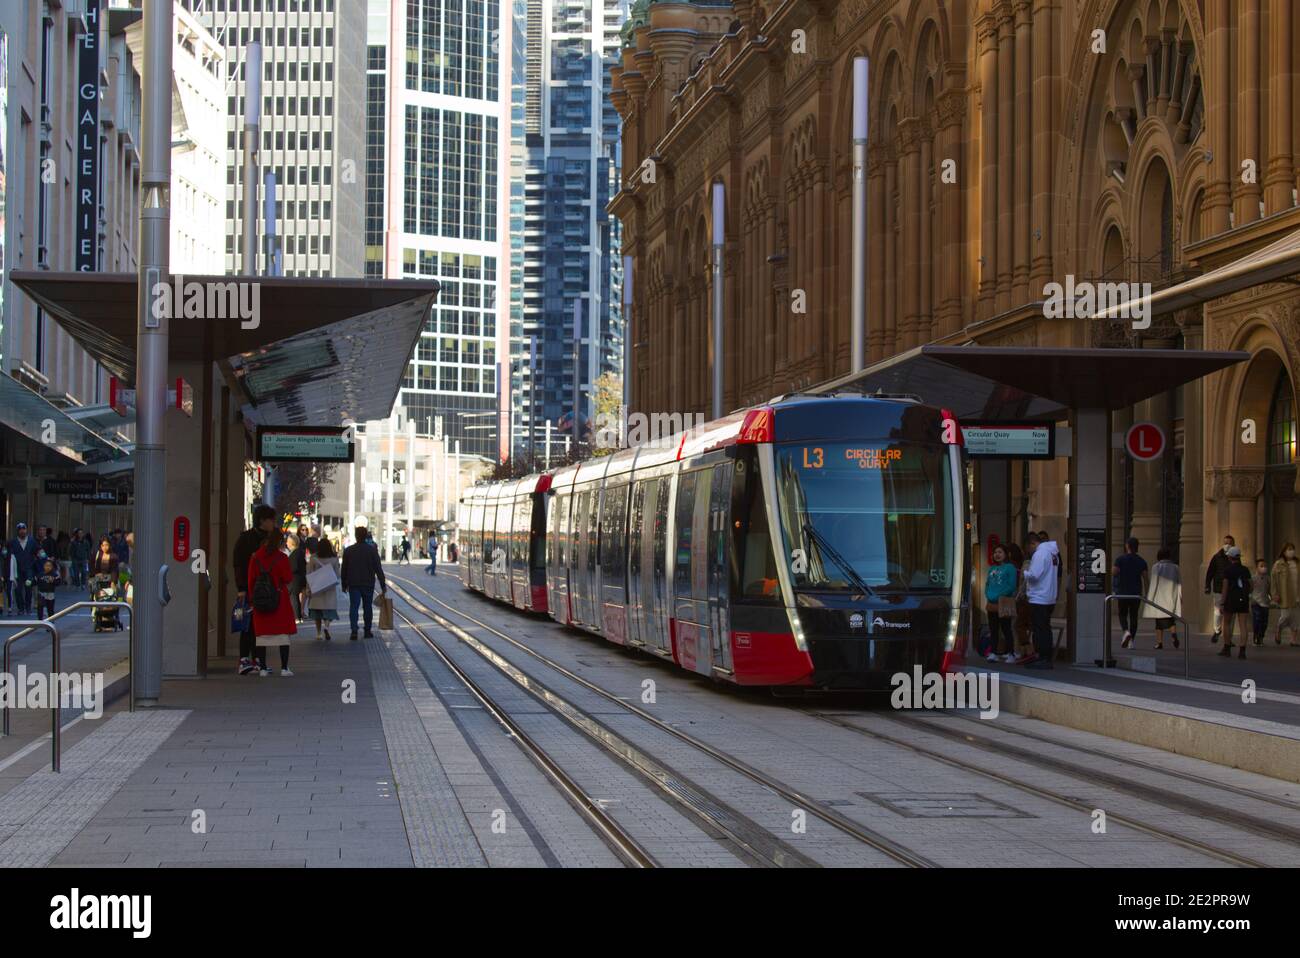 Sydney Light Rail public transport system stopping at Queen Victoria Building on George Street Sydney Australia Stock Photo